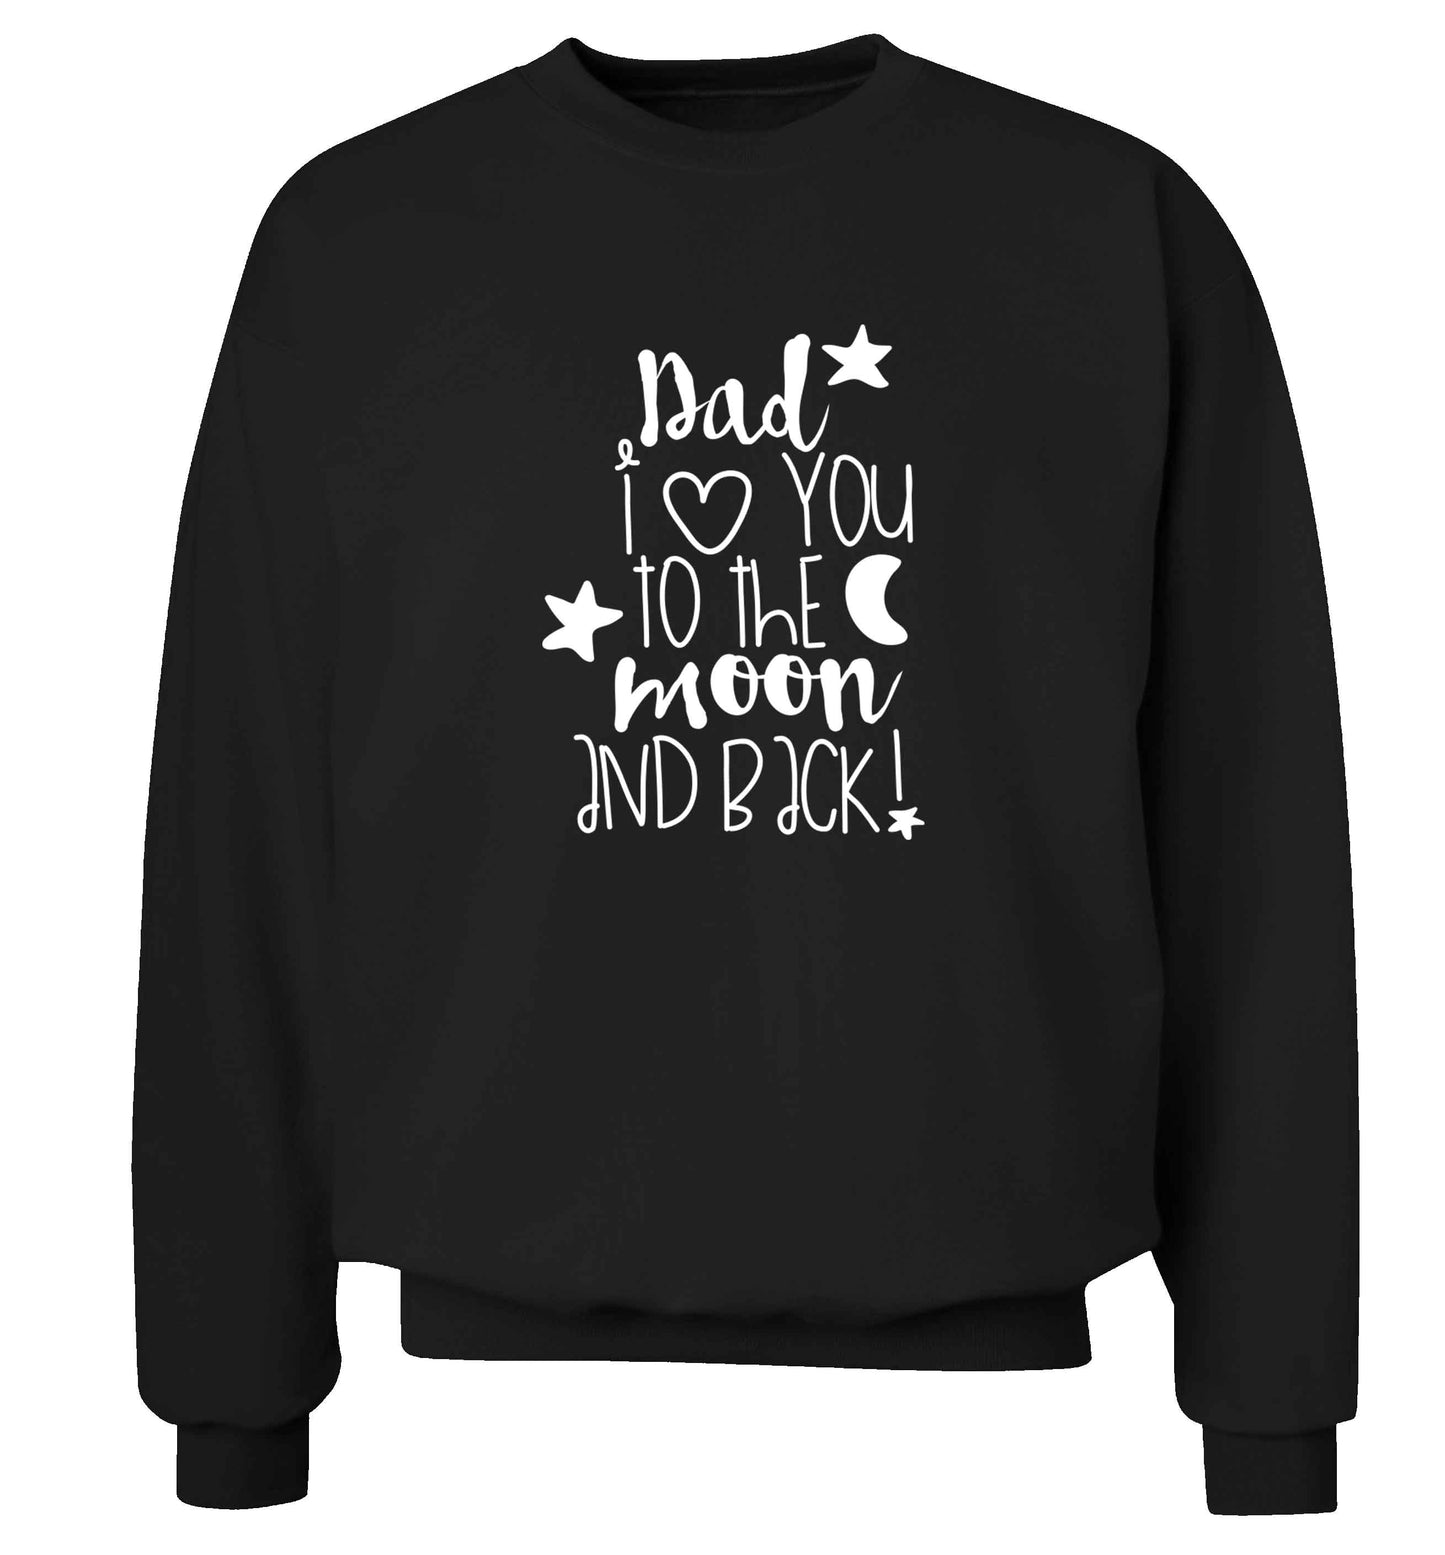 Dad I love you to the moon and back adult's unisex black sweater 2XL